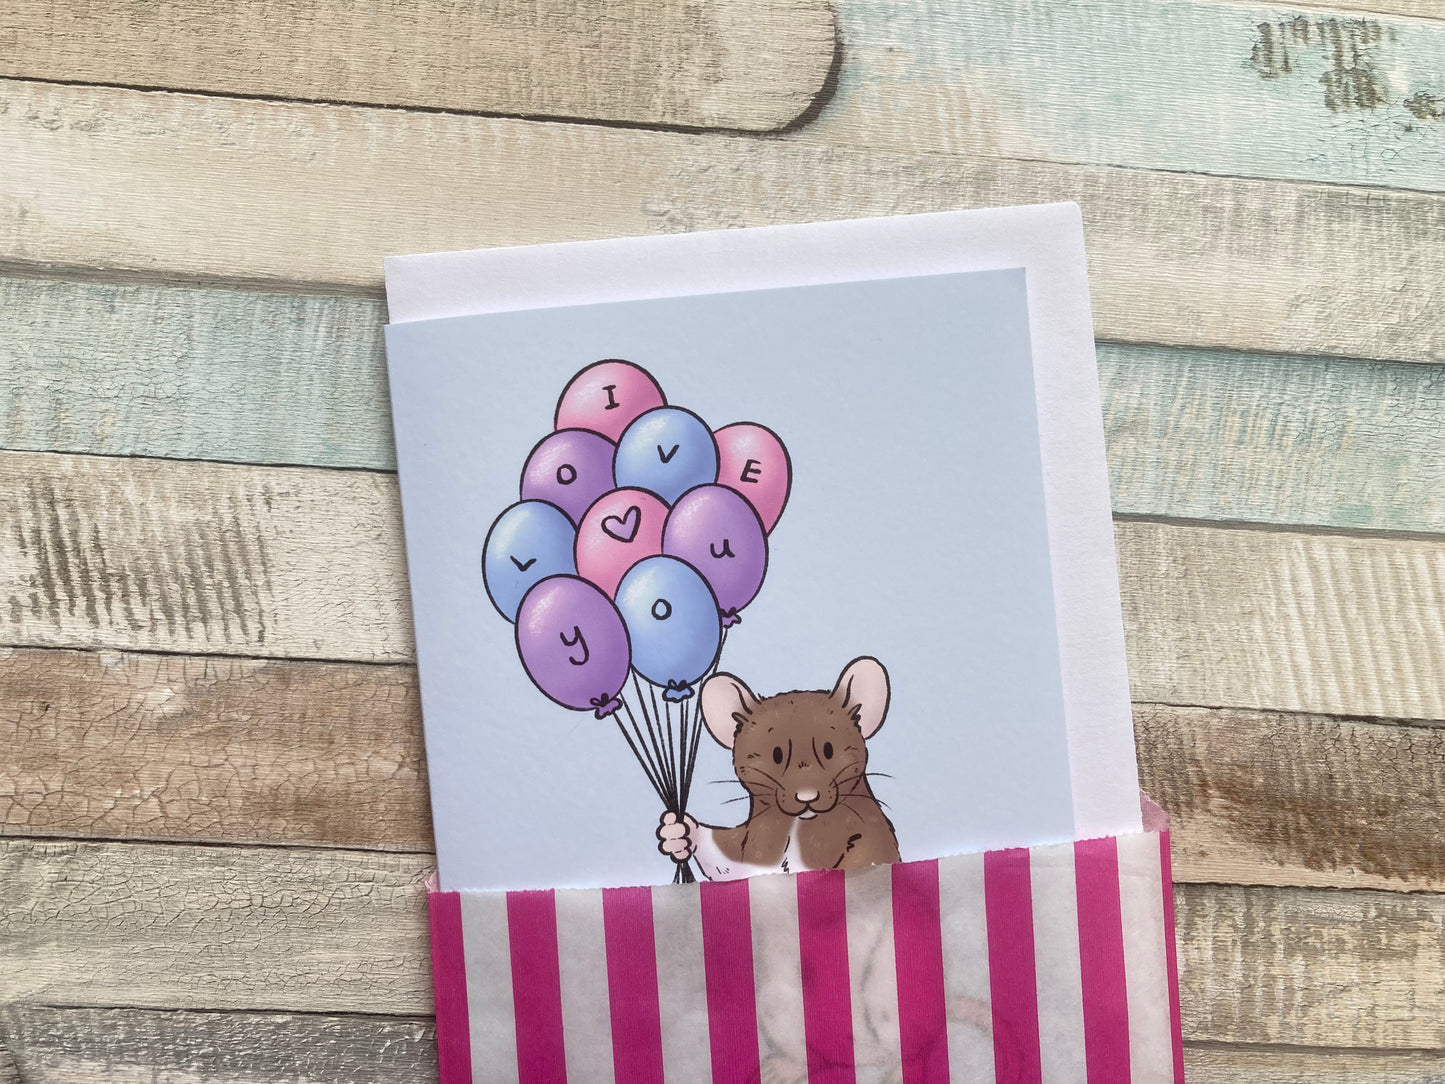 I love you balloon rat A6 greeting card, rat Valentine's Day card, white envelope, rat gift